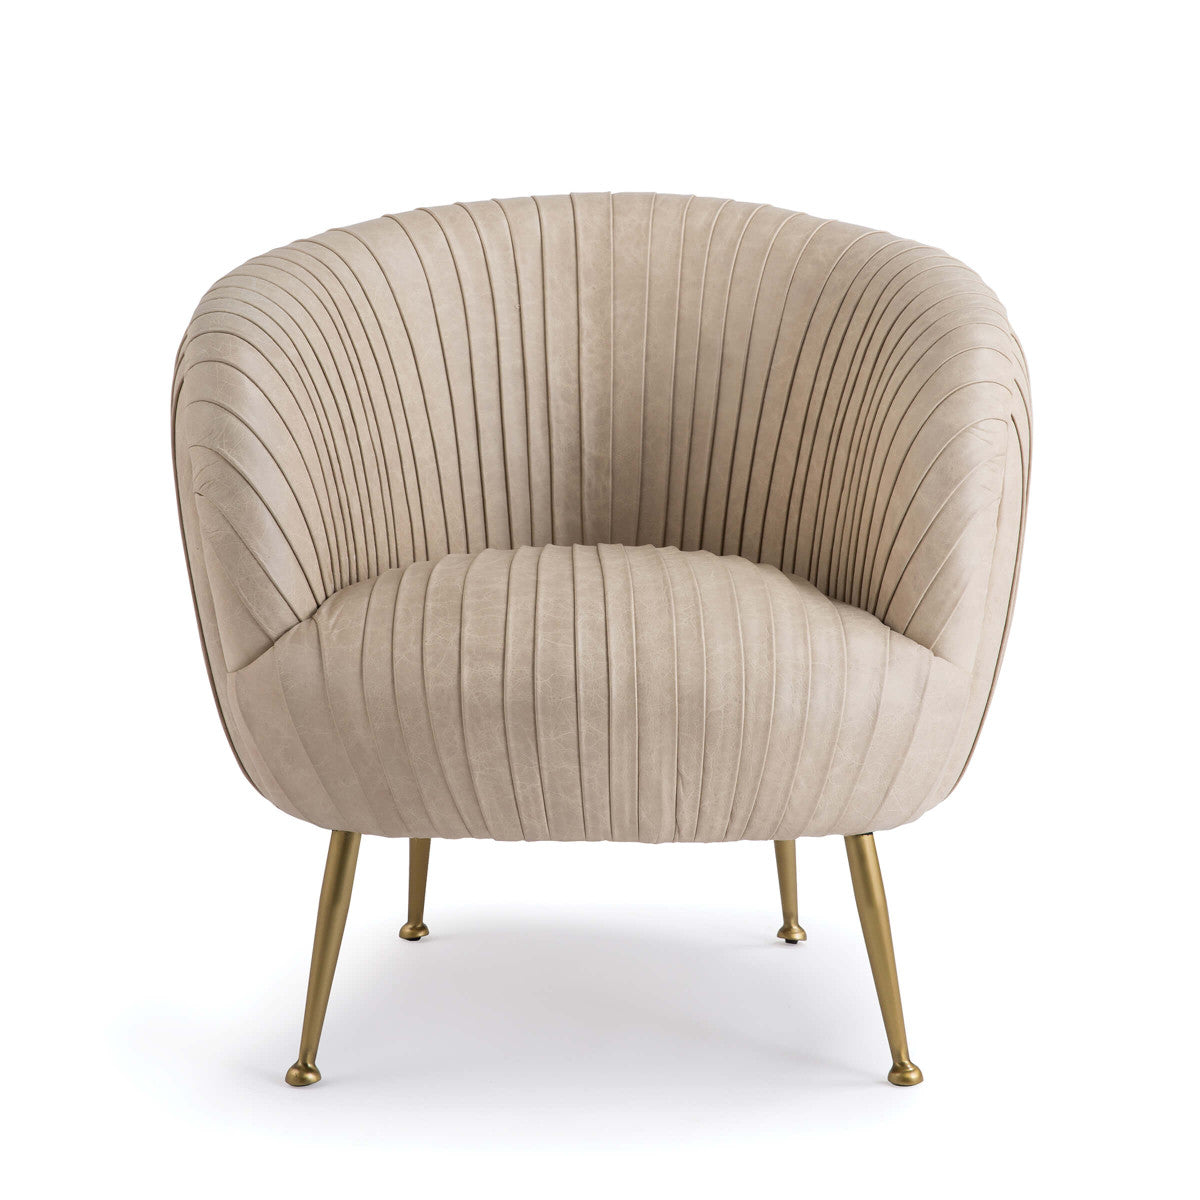 tan pleated leather chair with brass legs